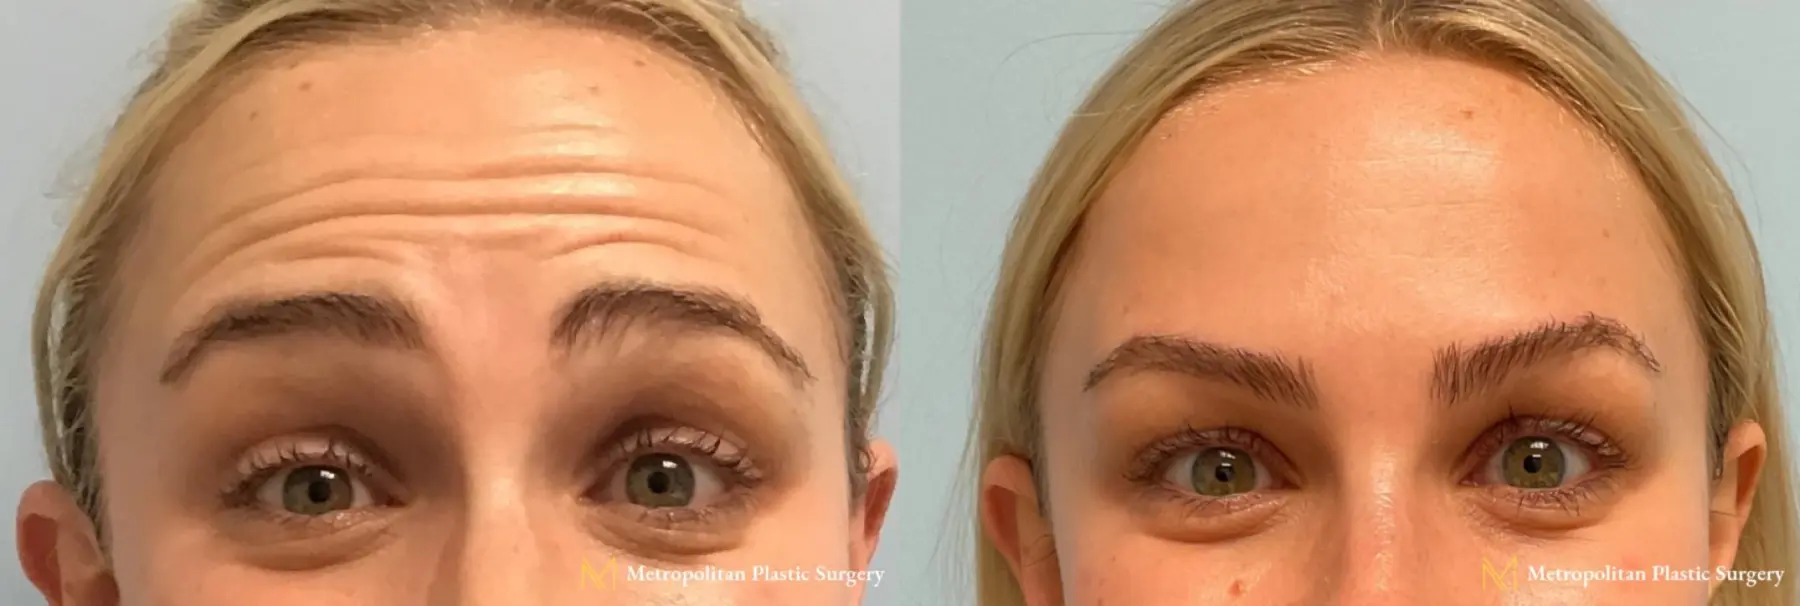 BOTOX® Cosmetic: Patient 4 - Before and After  